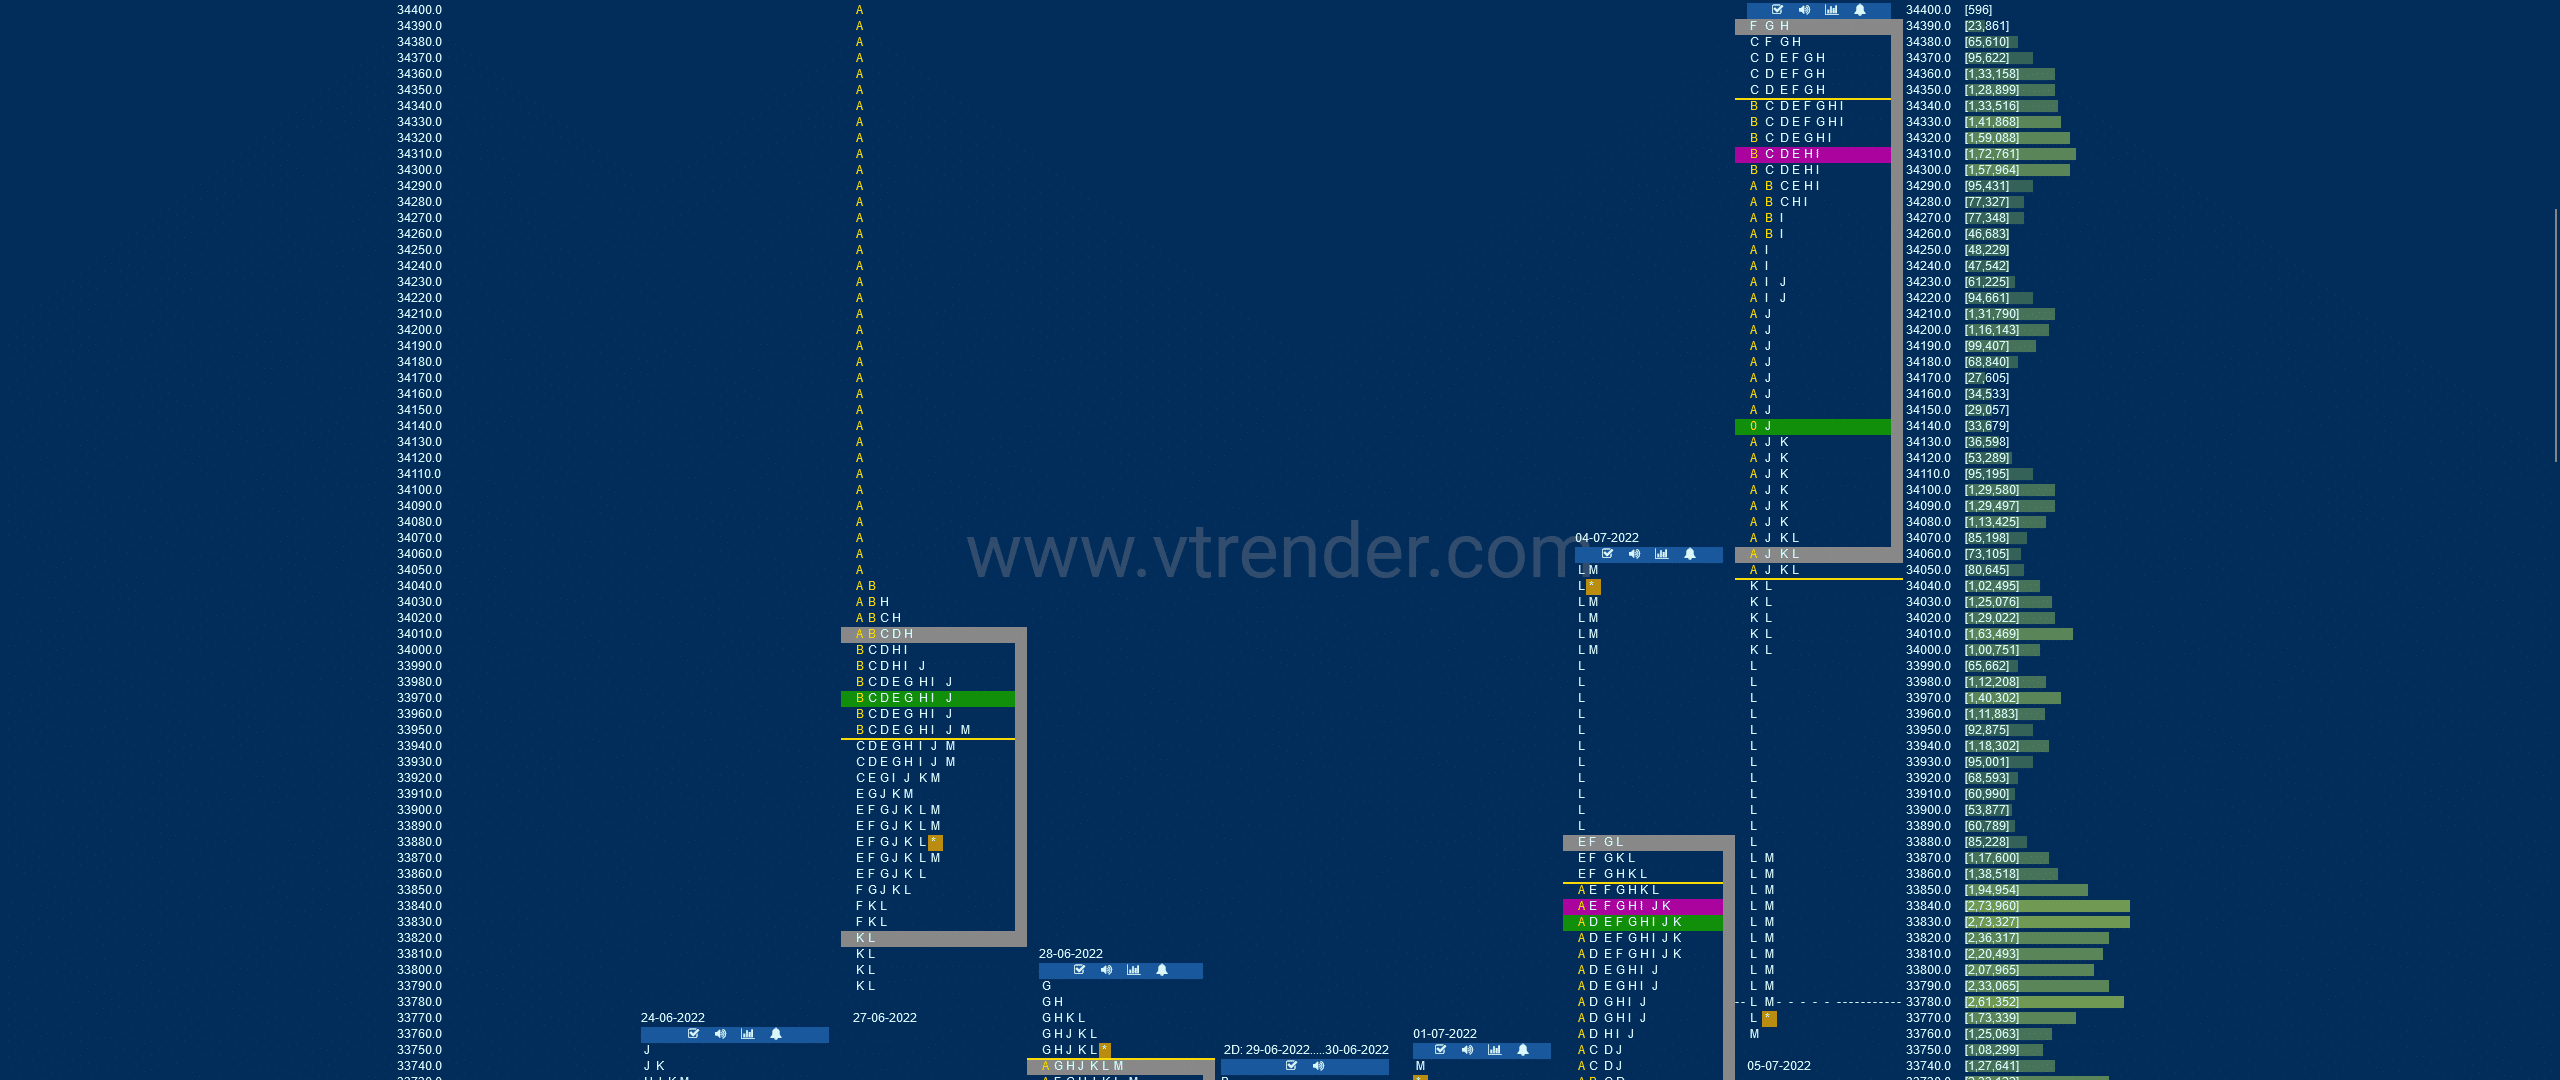 Bnf 3 Market Profile Analysis Dated 05Th Jul 2022 Banknifty Futures, Charts, Day Trading, Intraday Trading, Intraday Trading Strategies, Market Profile, Market Profile Trading Strategies, Nifty Futures, Order Flow Analysis, Support And Resistance, Technical Analysis, Trading Strategies, Volume Profile Trading